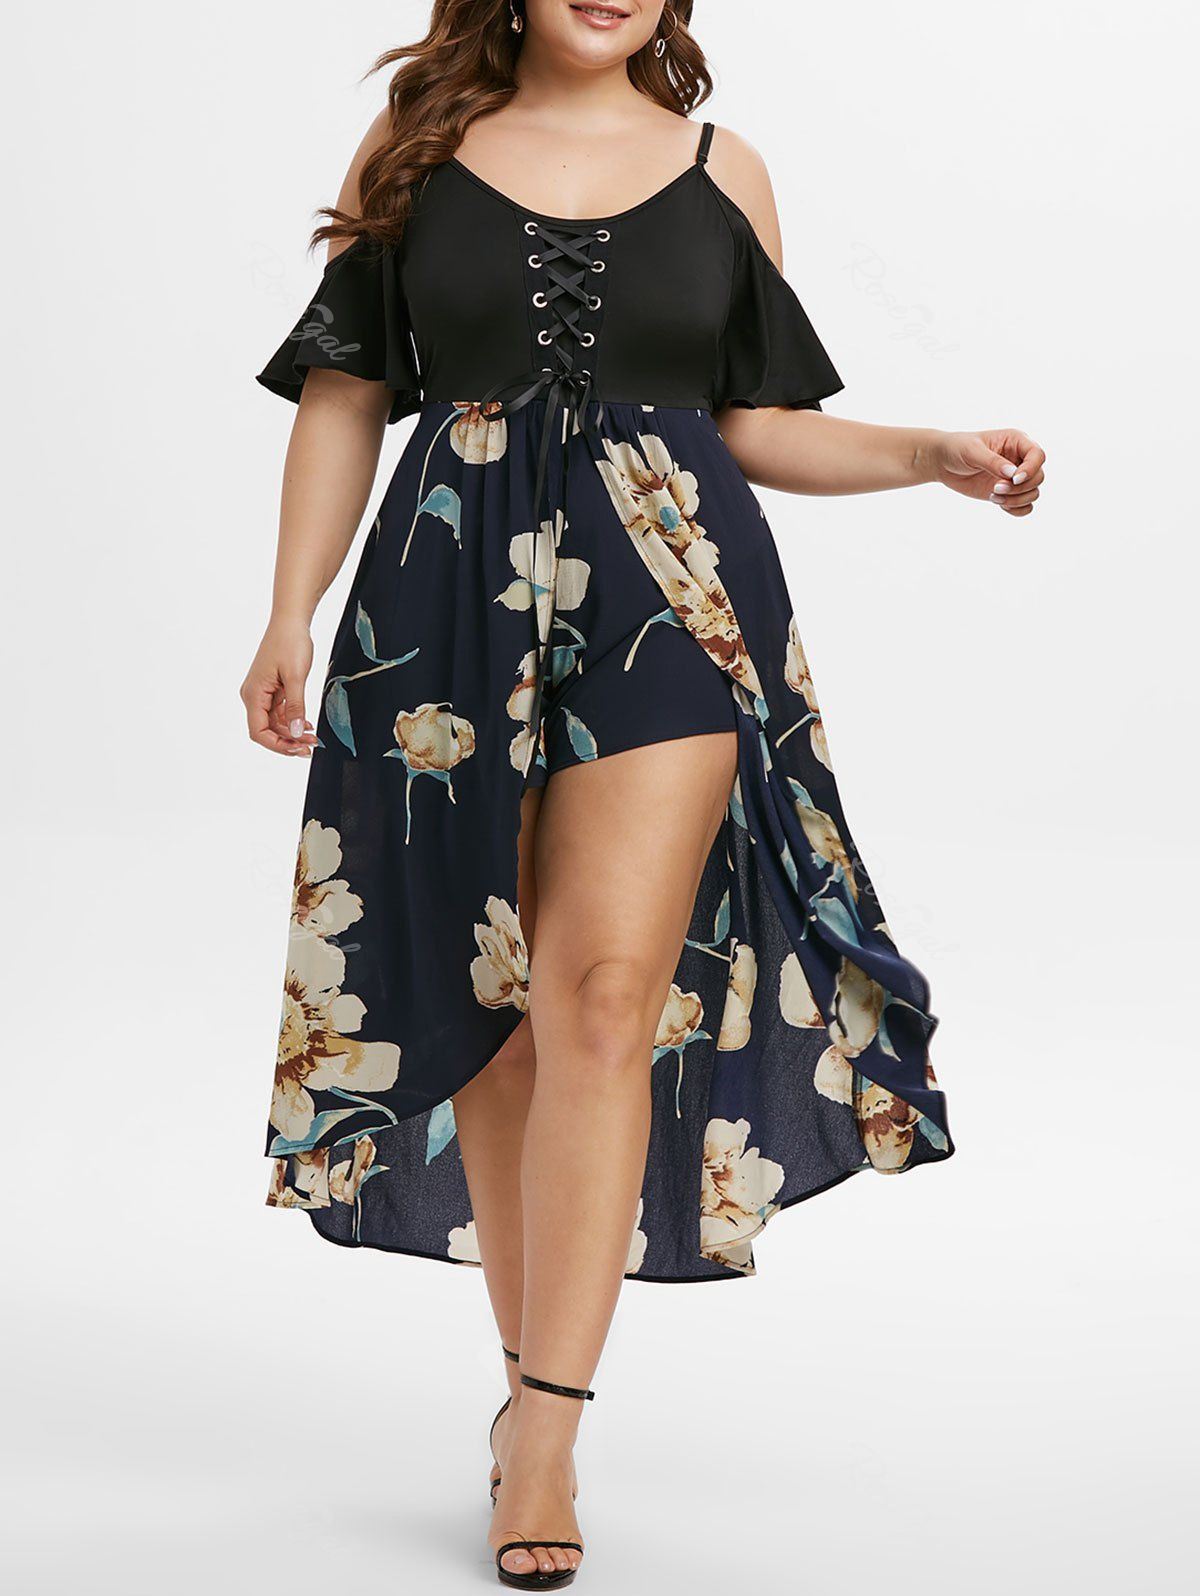 plus size clothing 5x and up